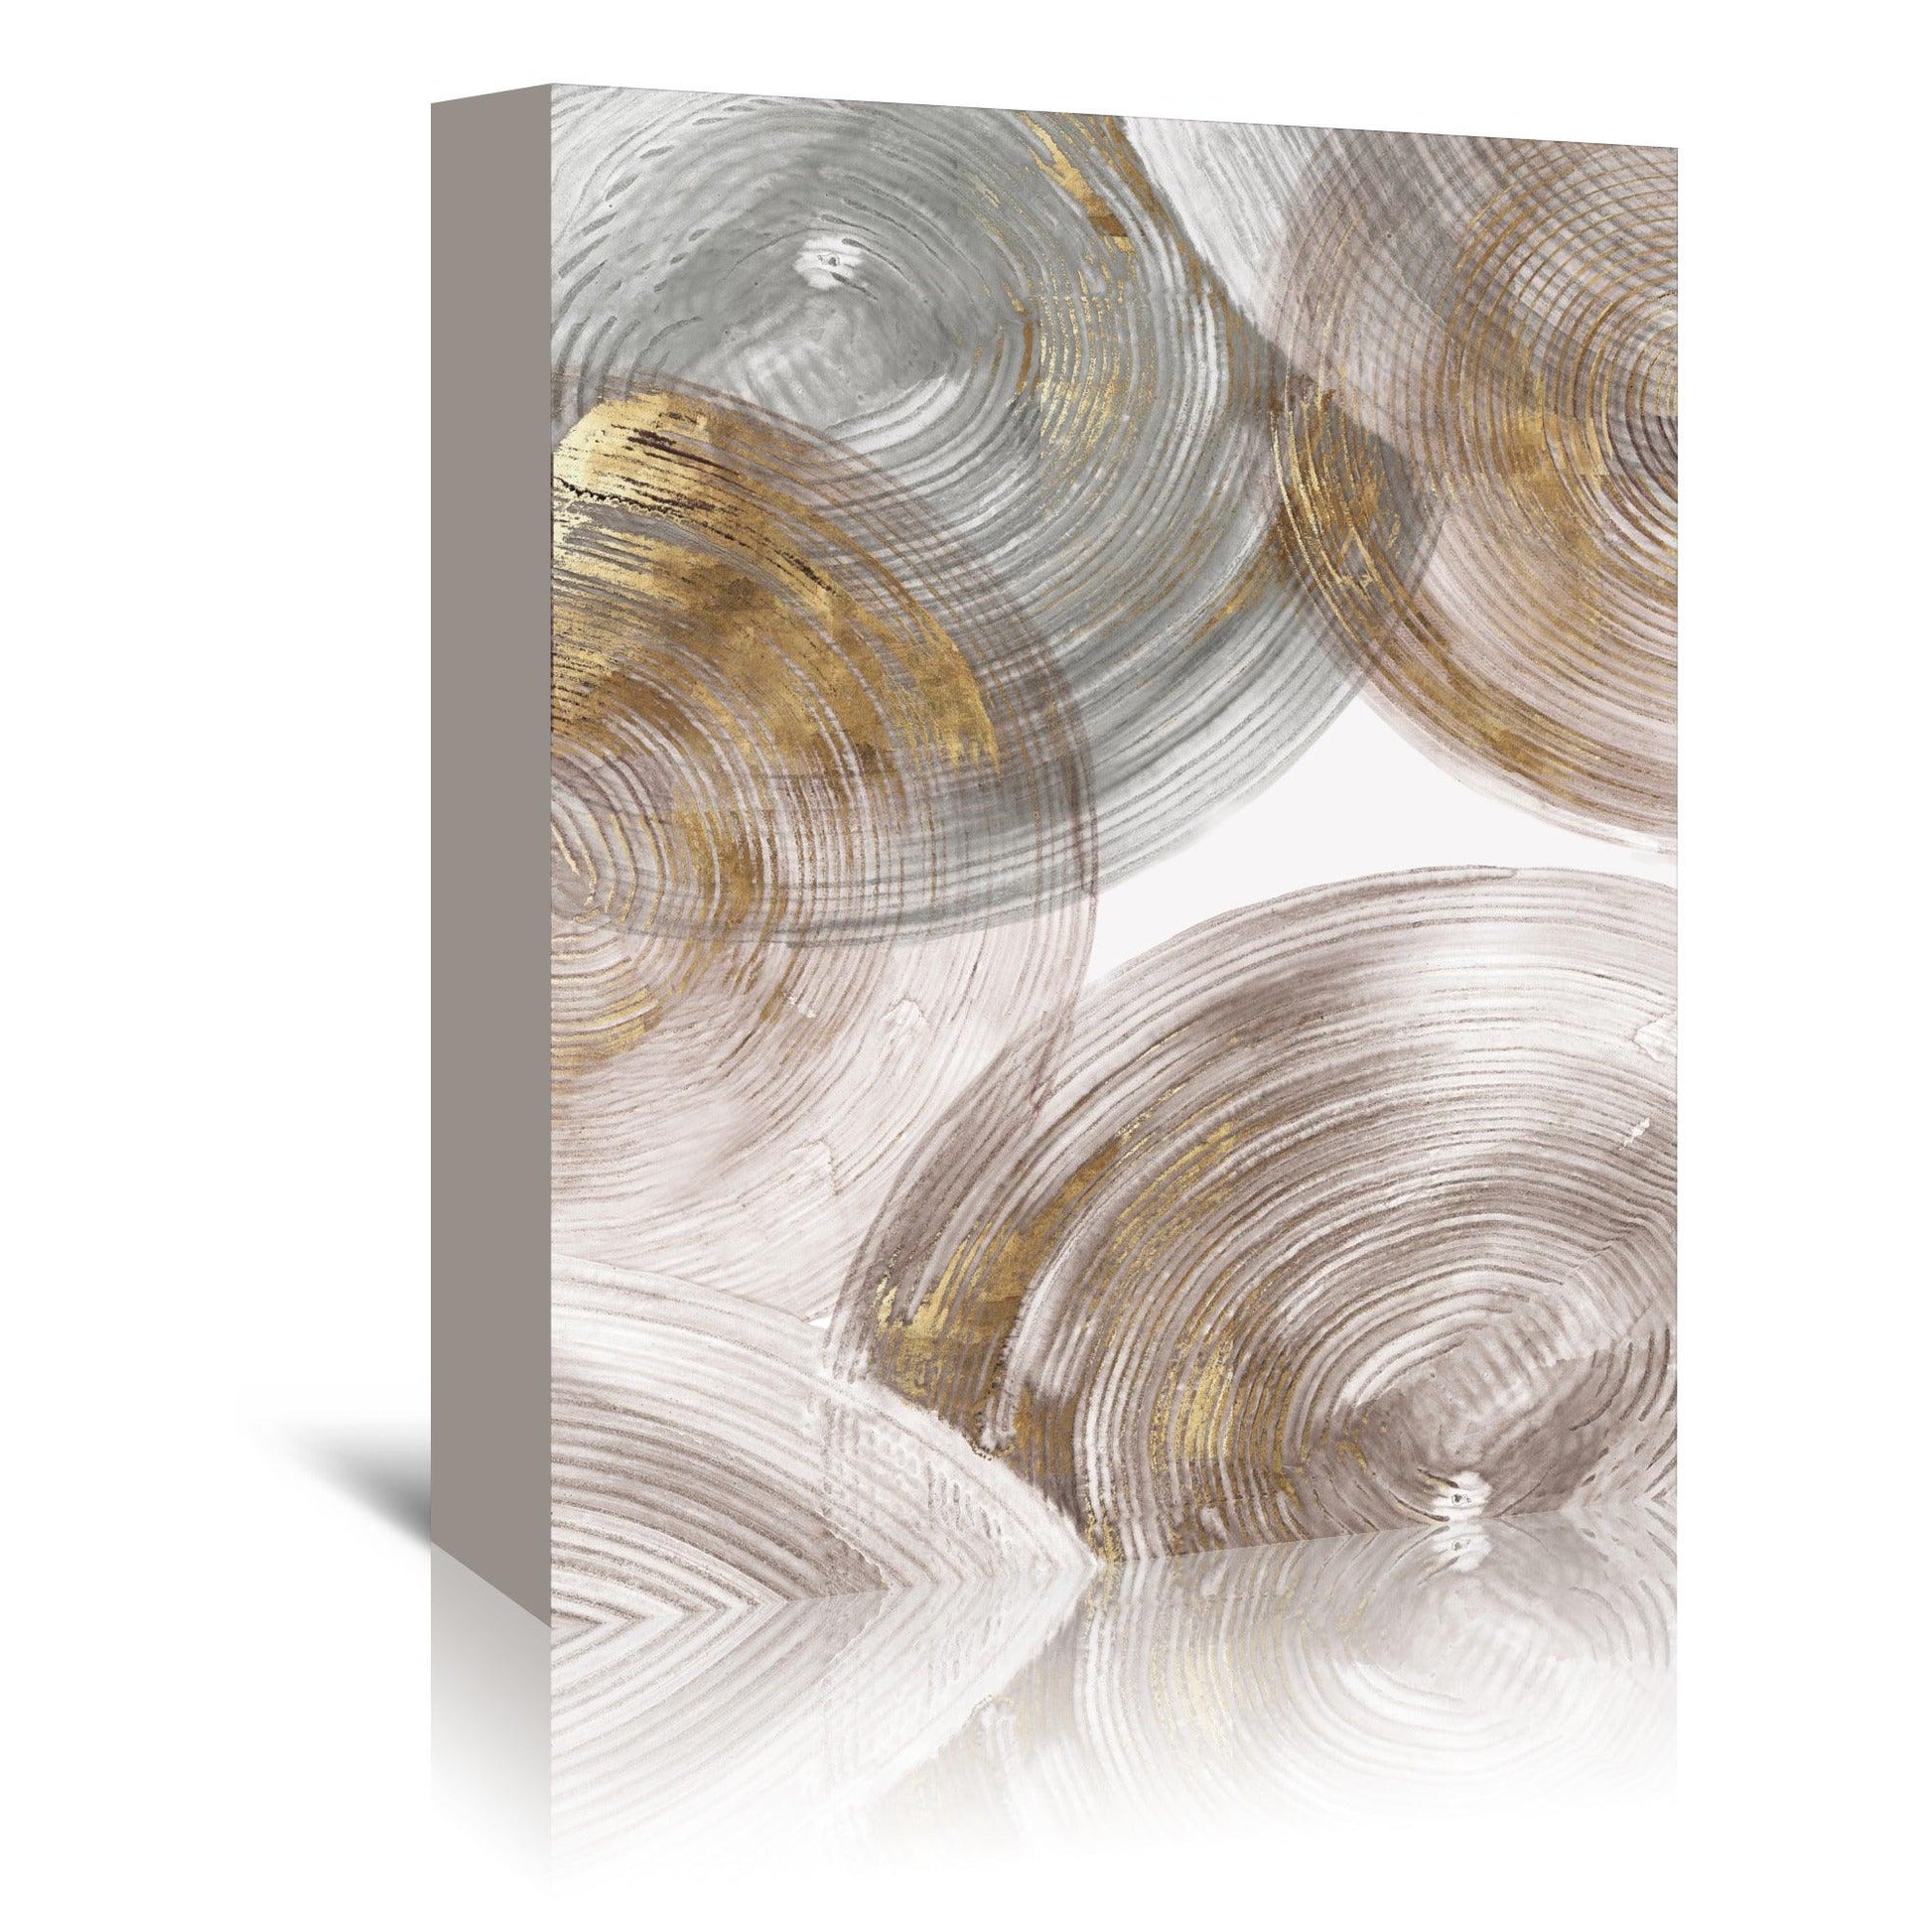 Spiral Rings Ii by PI Creative Art - Wrapped Canvas - Americanflat